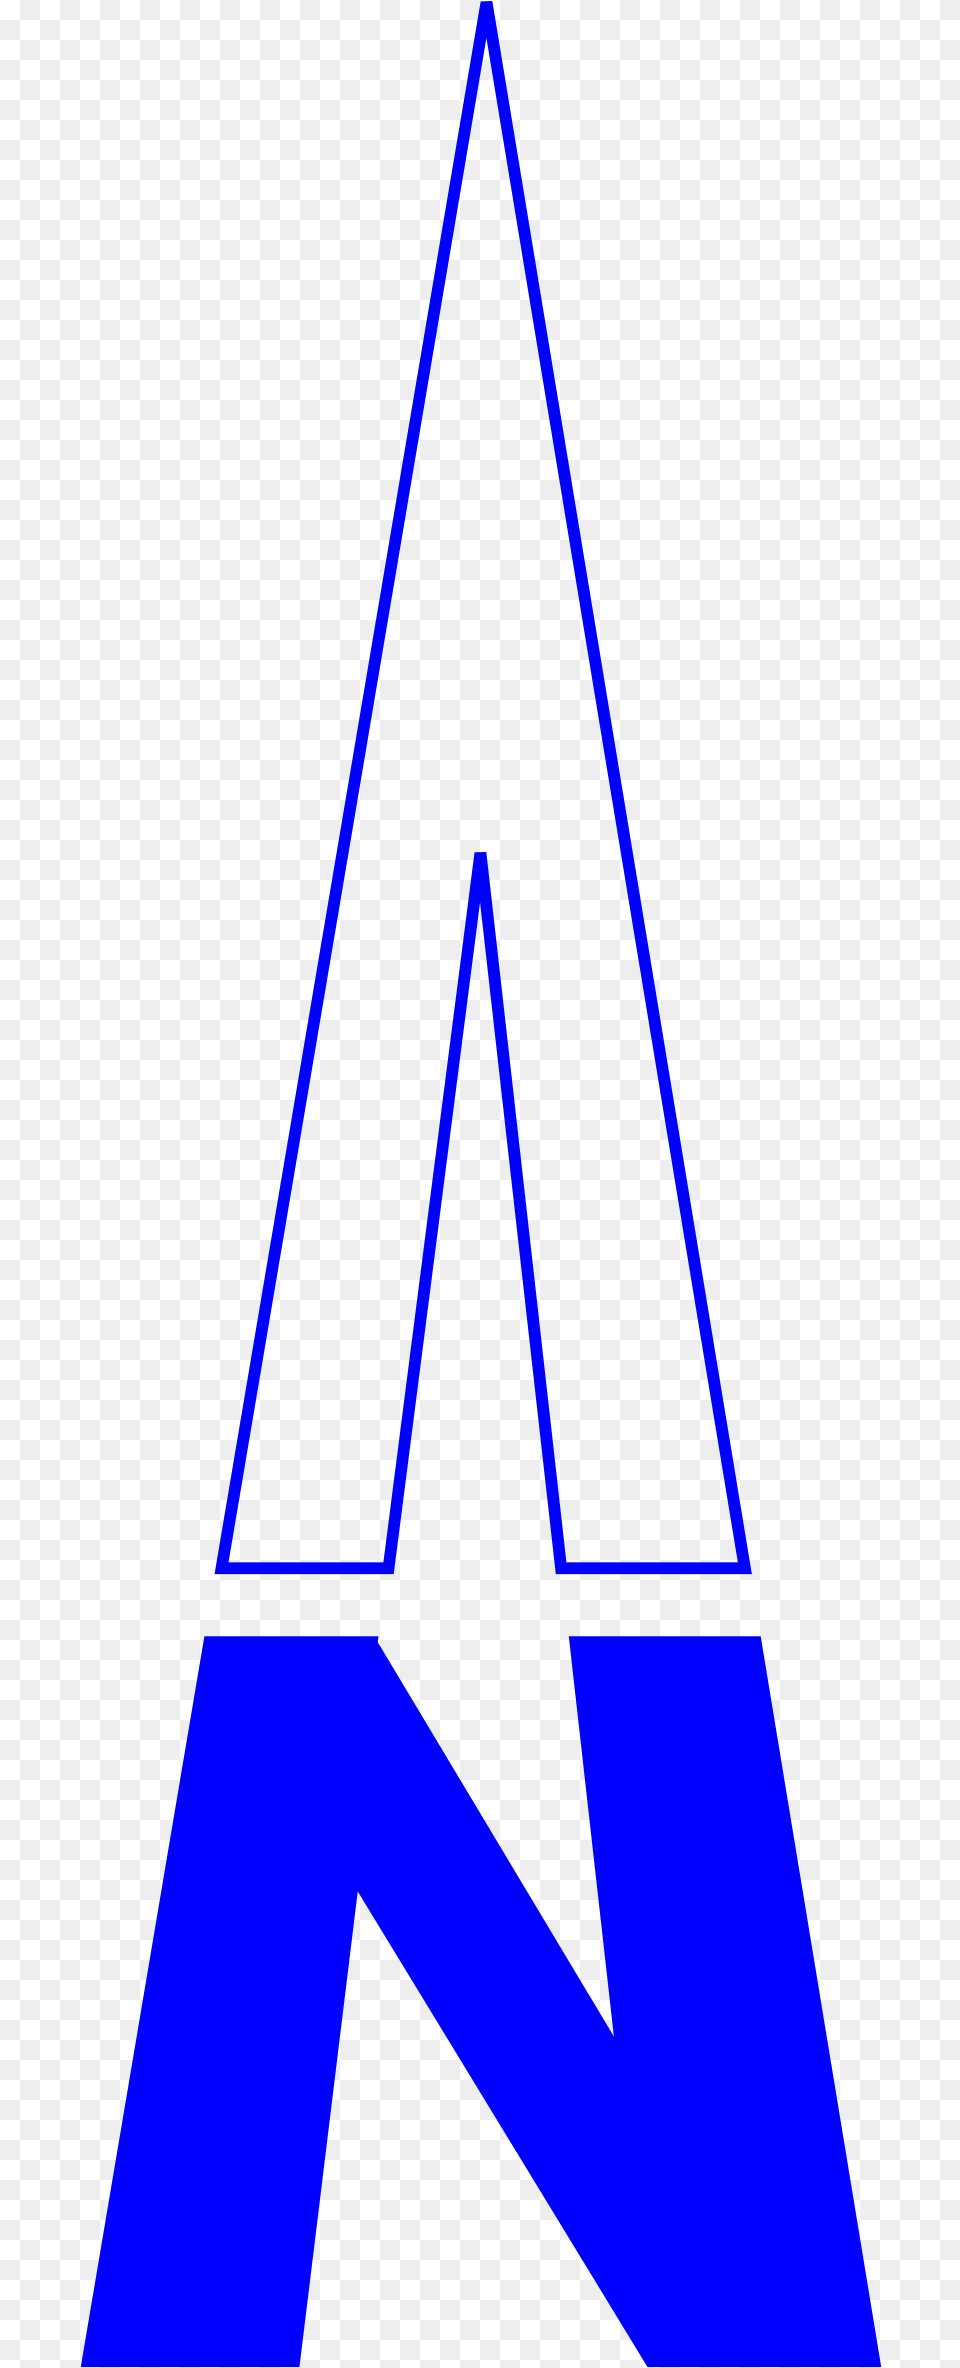 Image, Triangle, Symbol Png